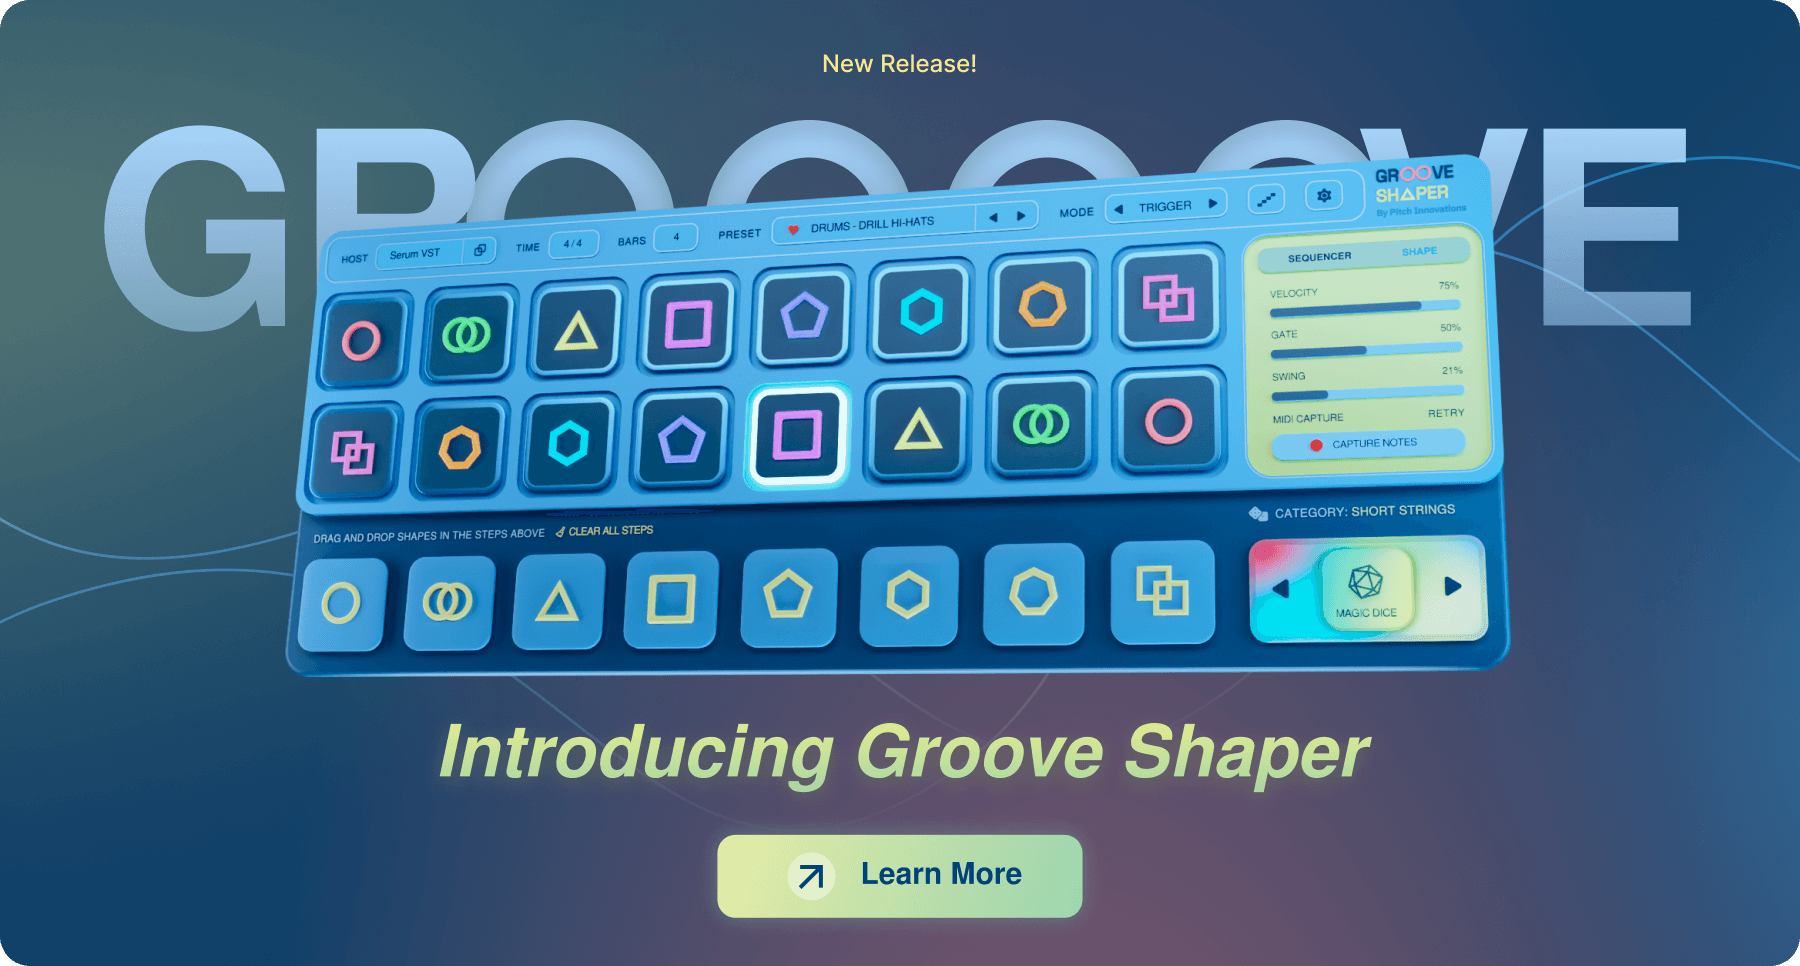 Introducing Groove Shaper